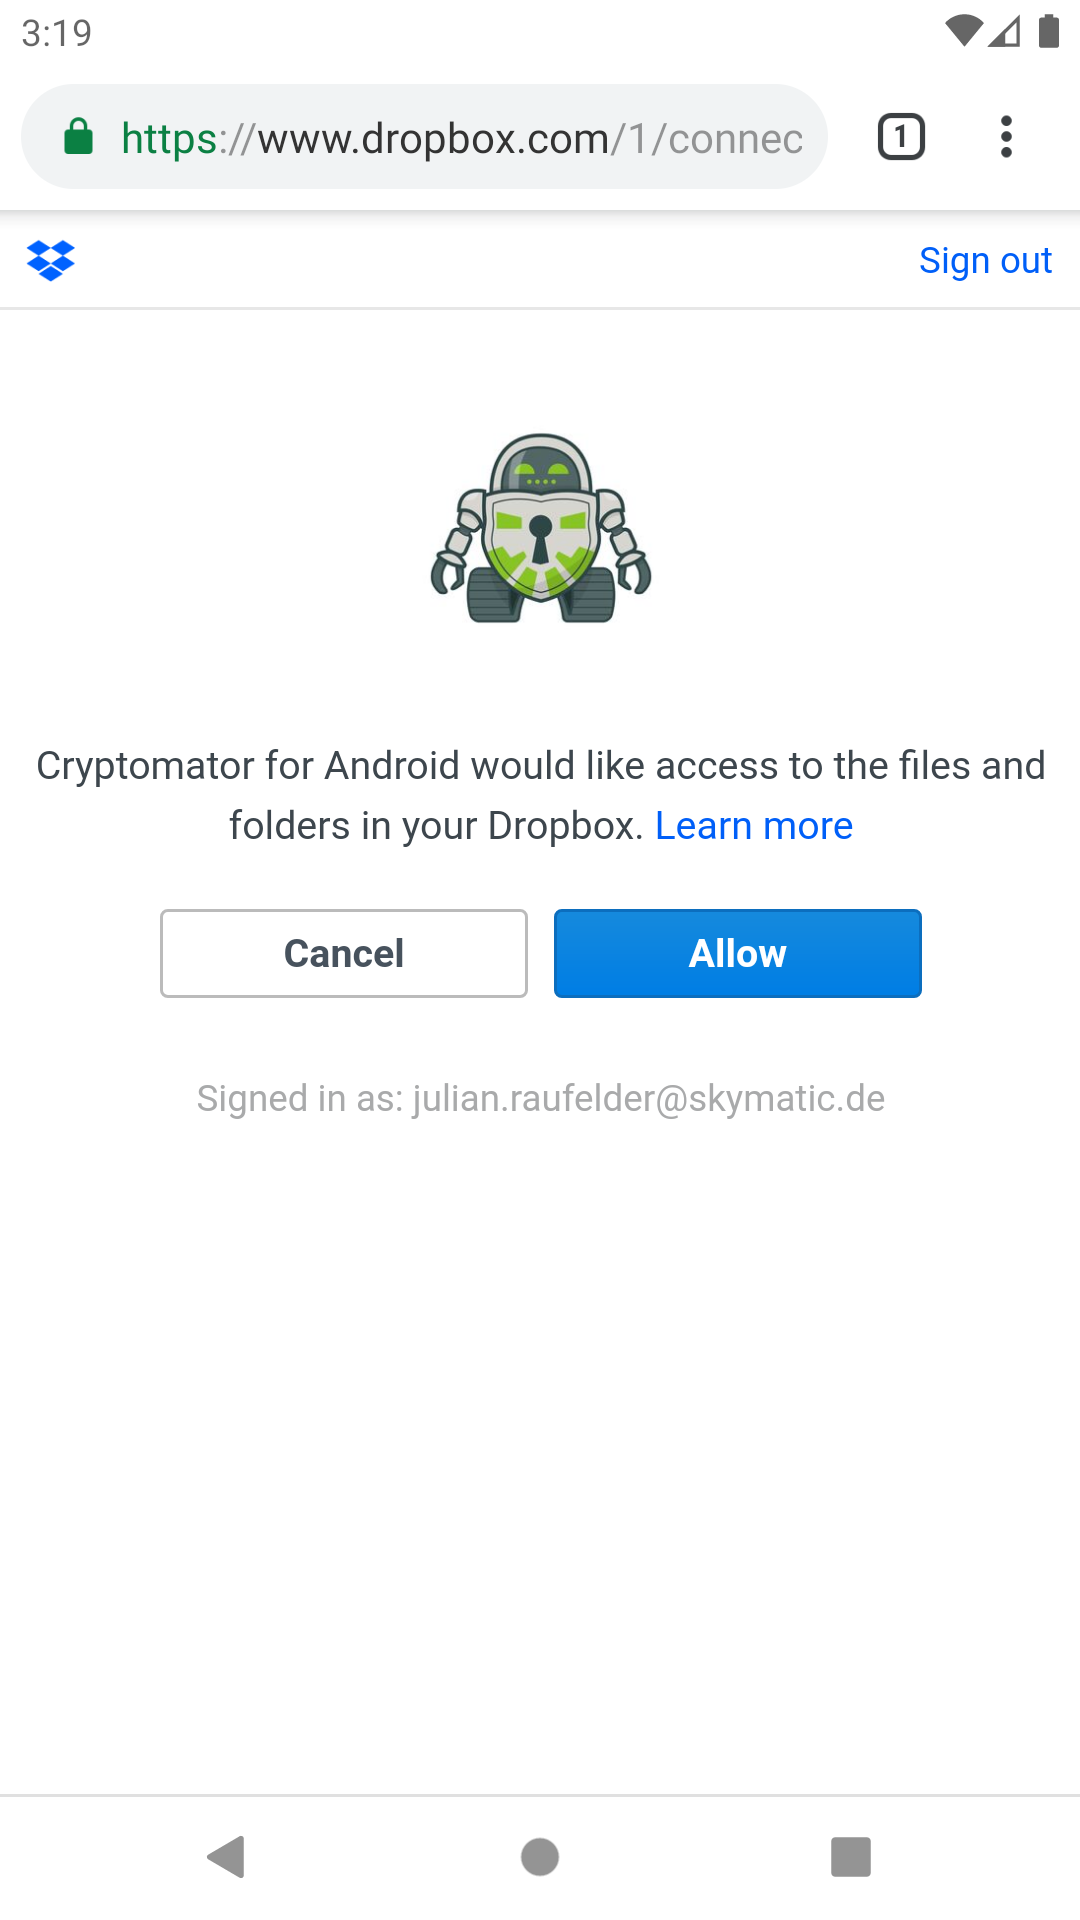 How to create a new vault with Android